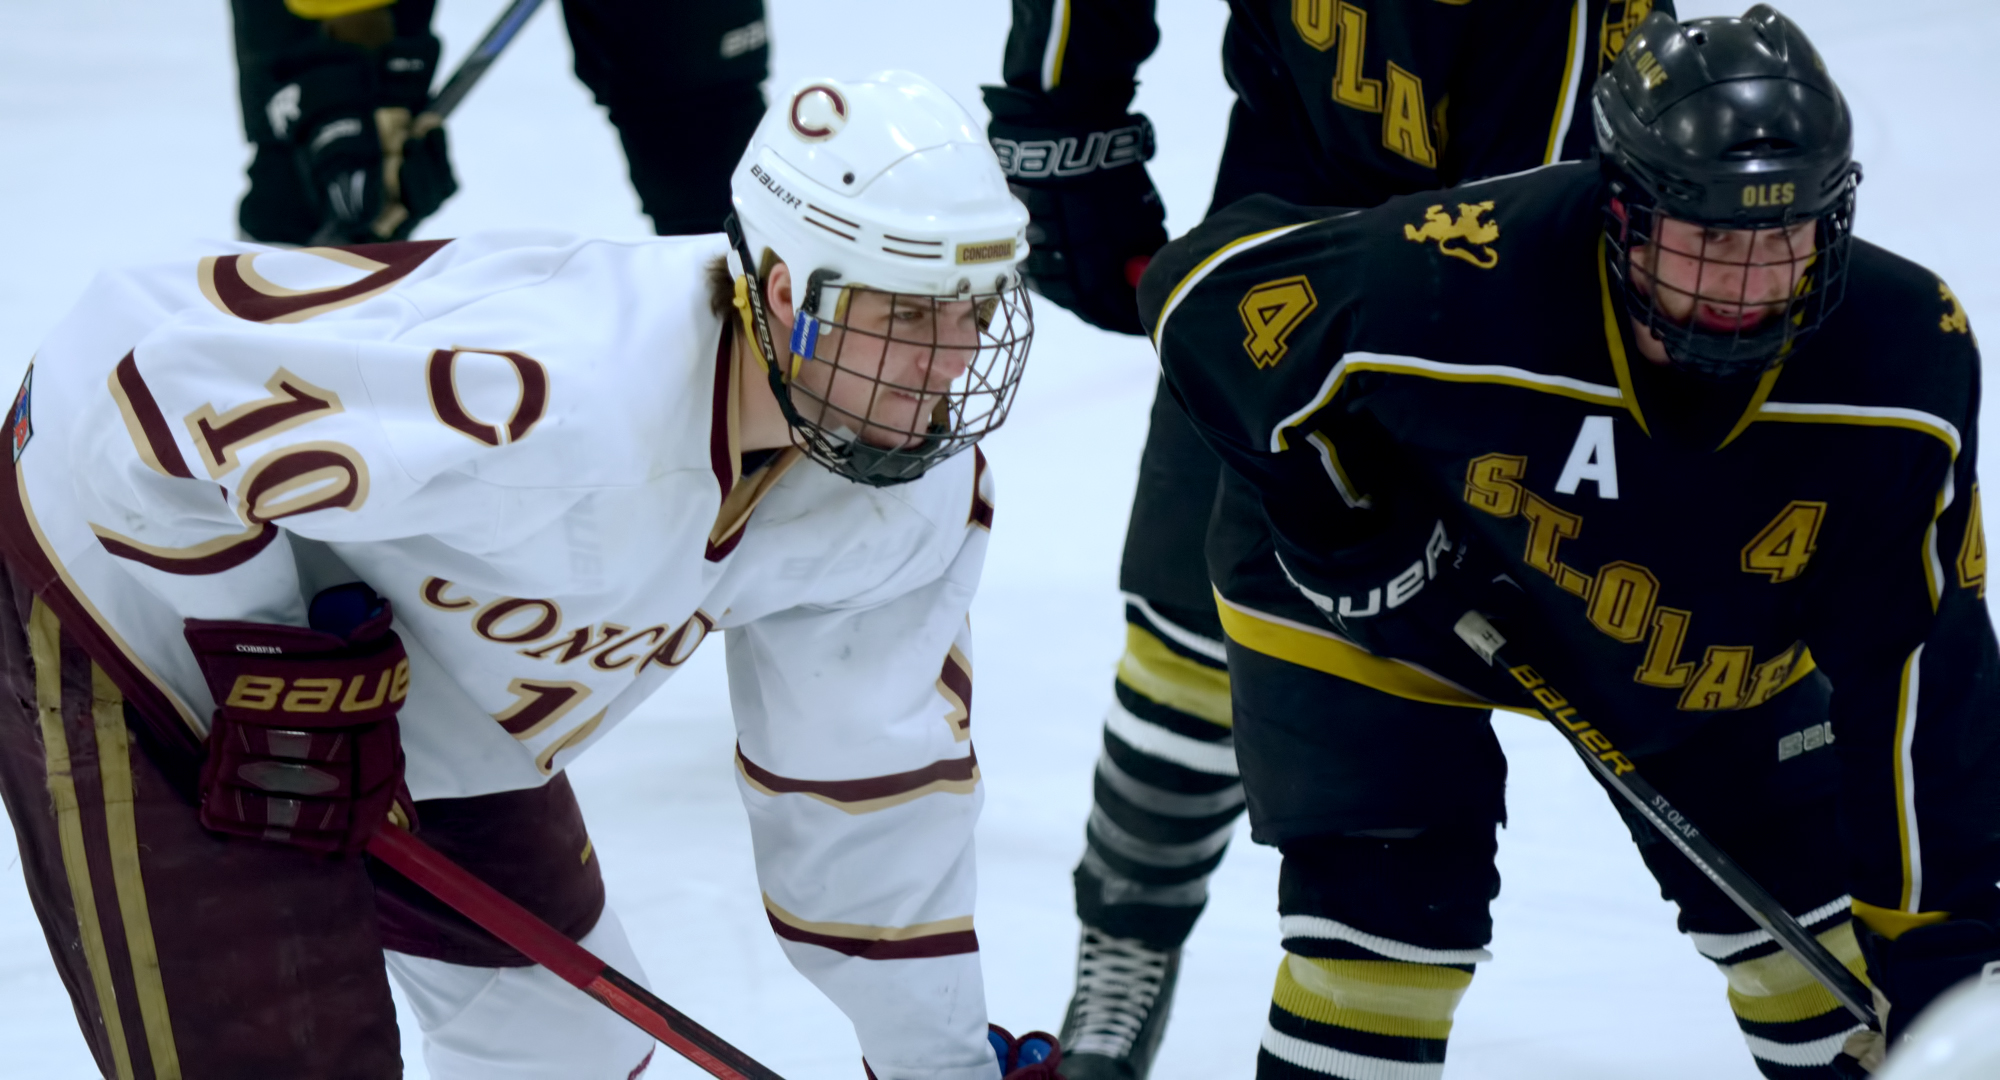 Zach Doerring had a goal and an assist in the Cobbers' 5-1 win at St. Olaf.